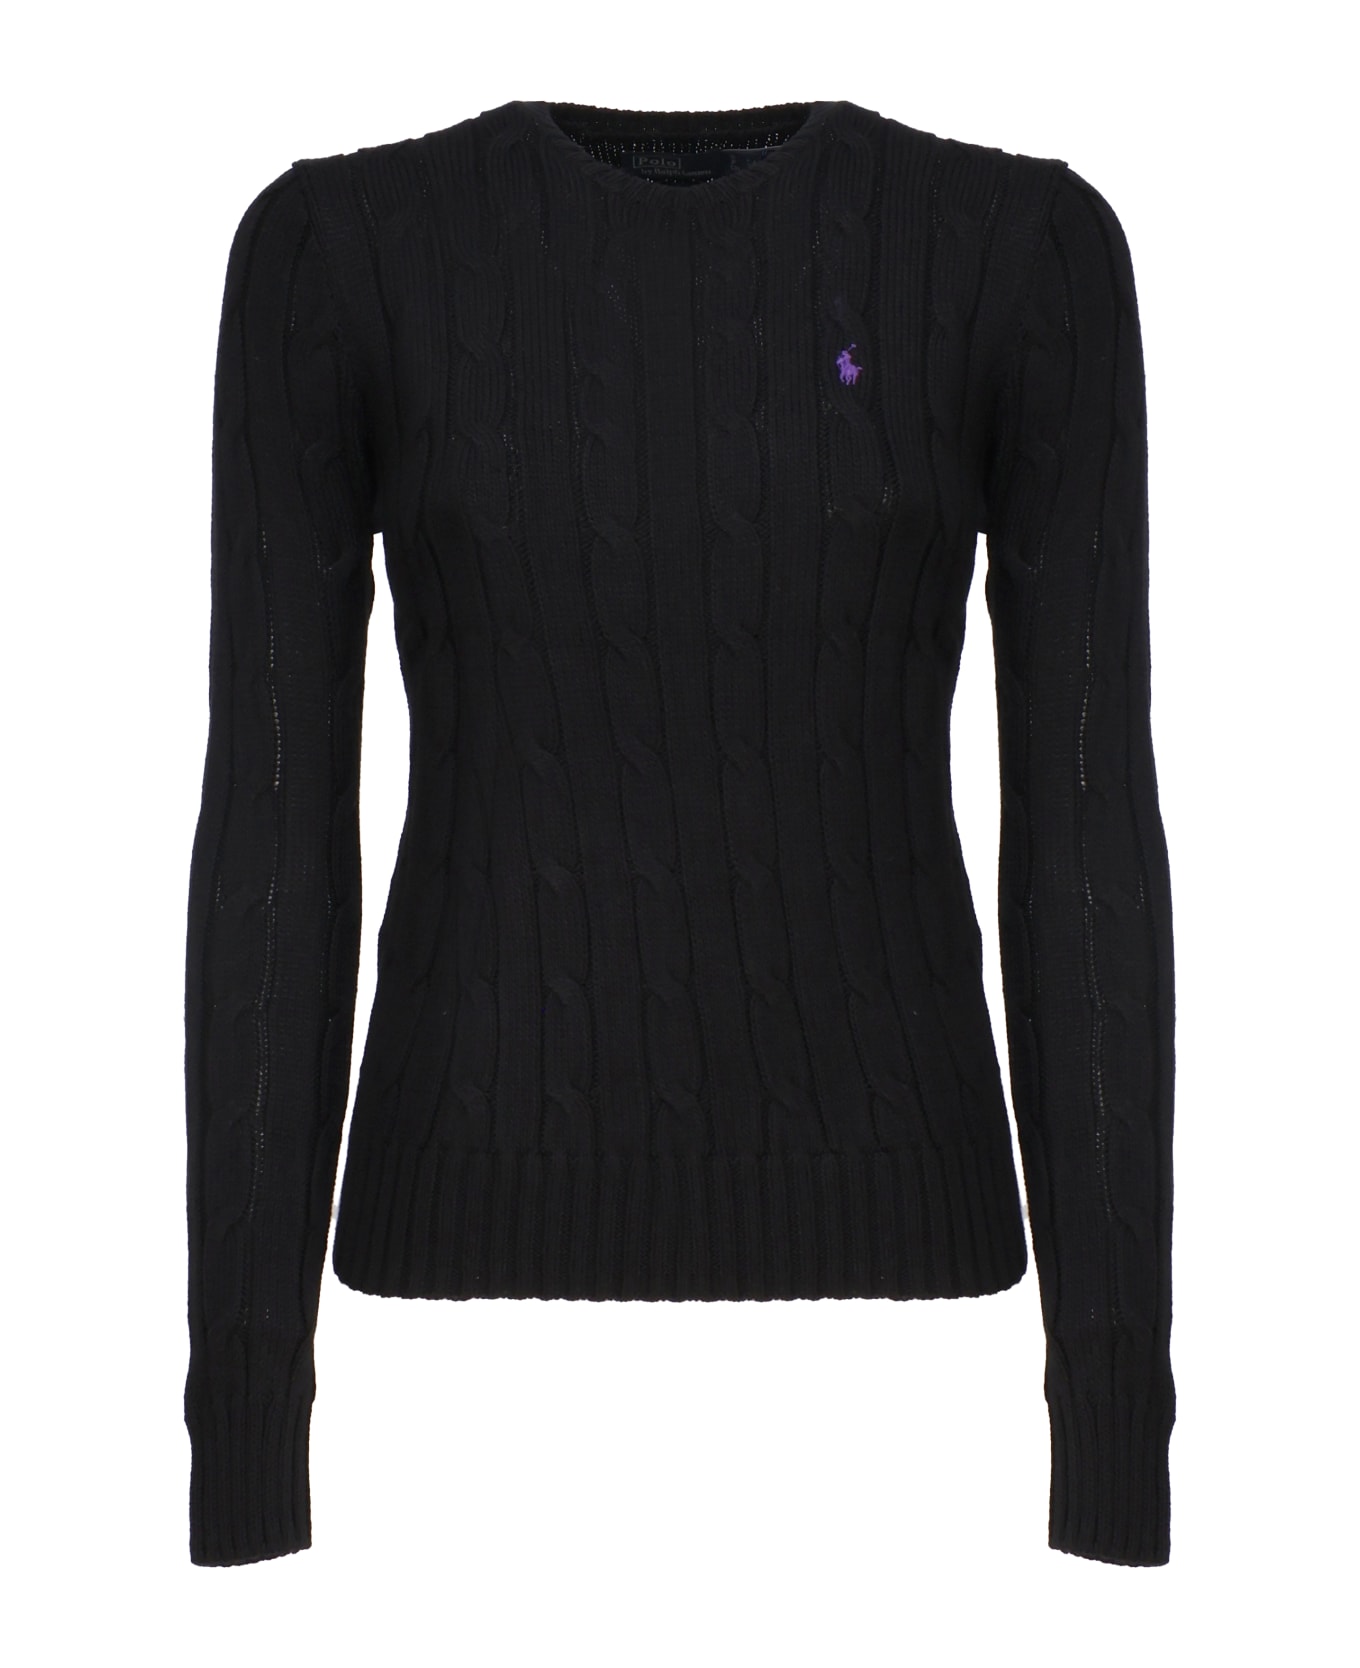 Polo Ralph Lauren Top With Embroidery - Black